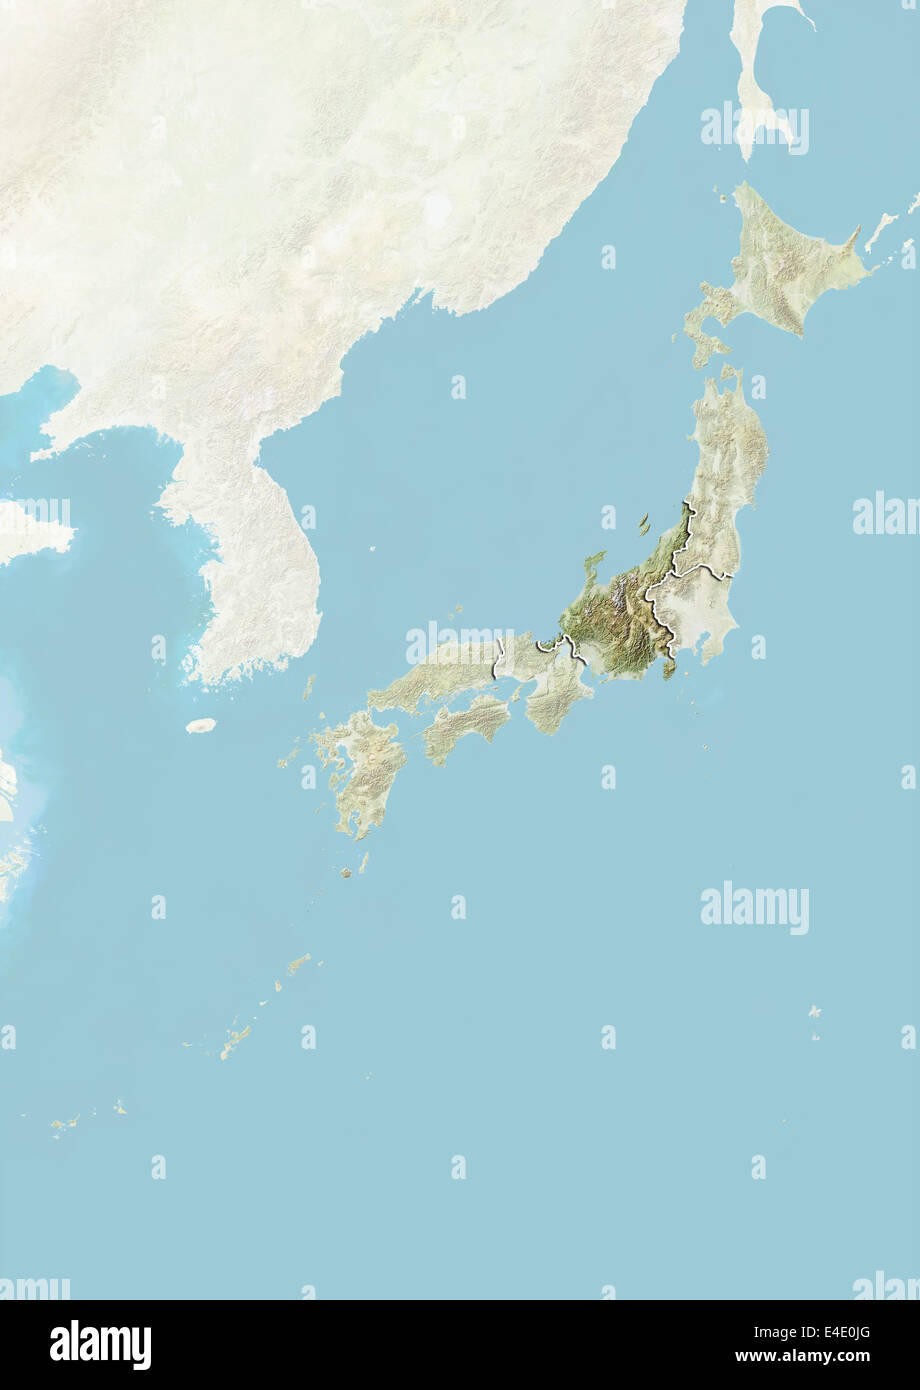 Japan and the Region of Chubu, Relief Map Stock Photo